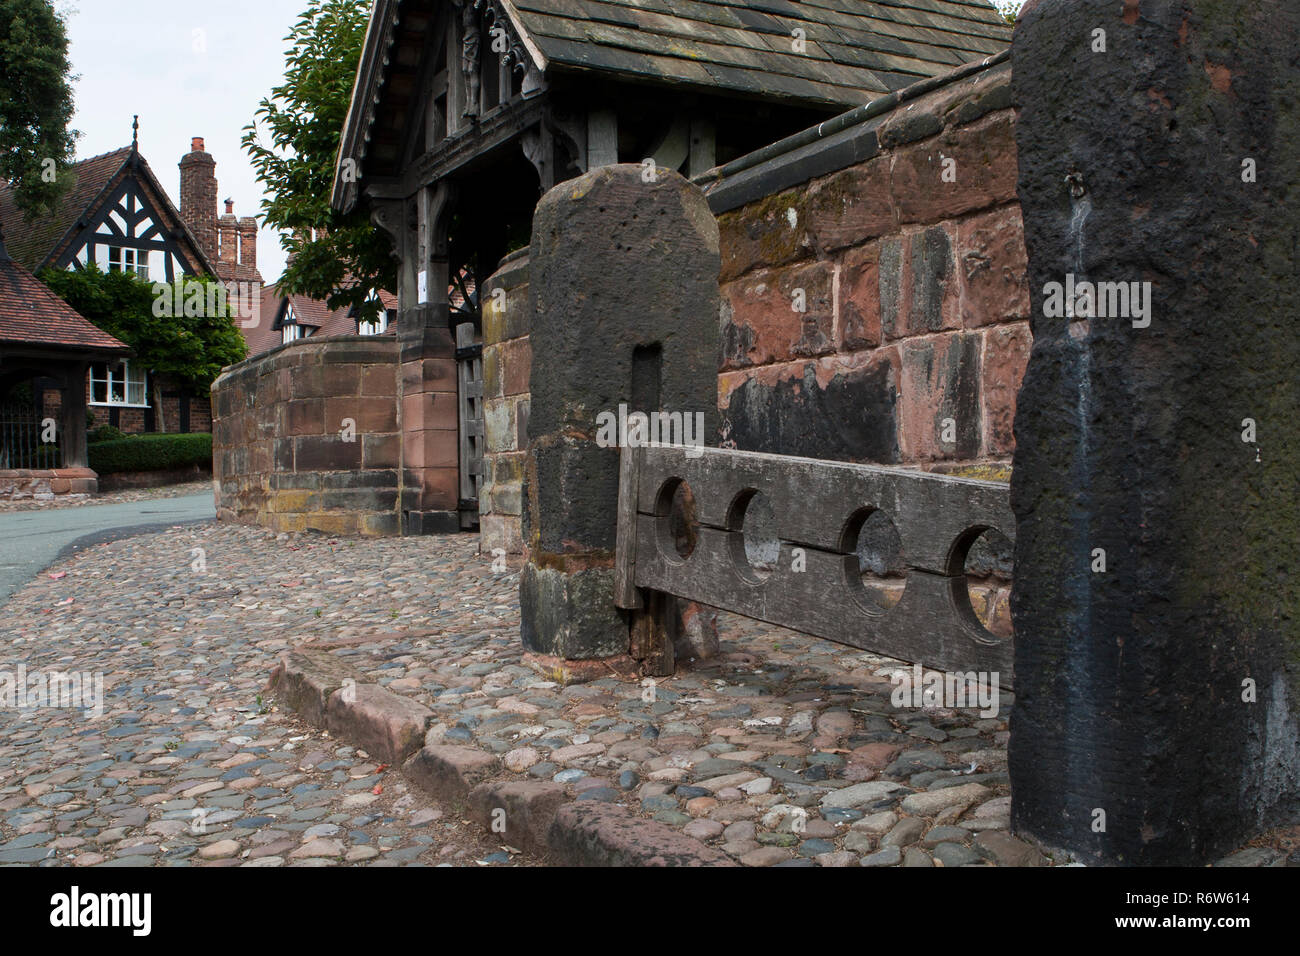 Stocks for punishment at supers church Great Budworth, Cheshire Stock Photo